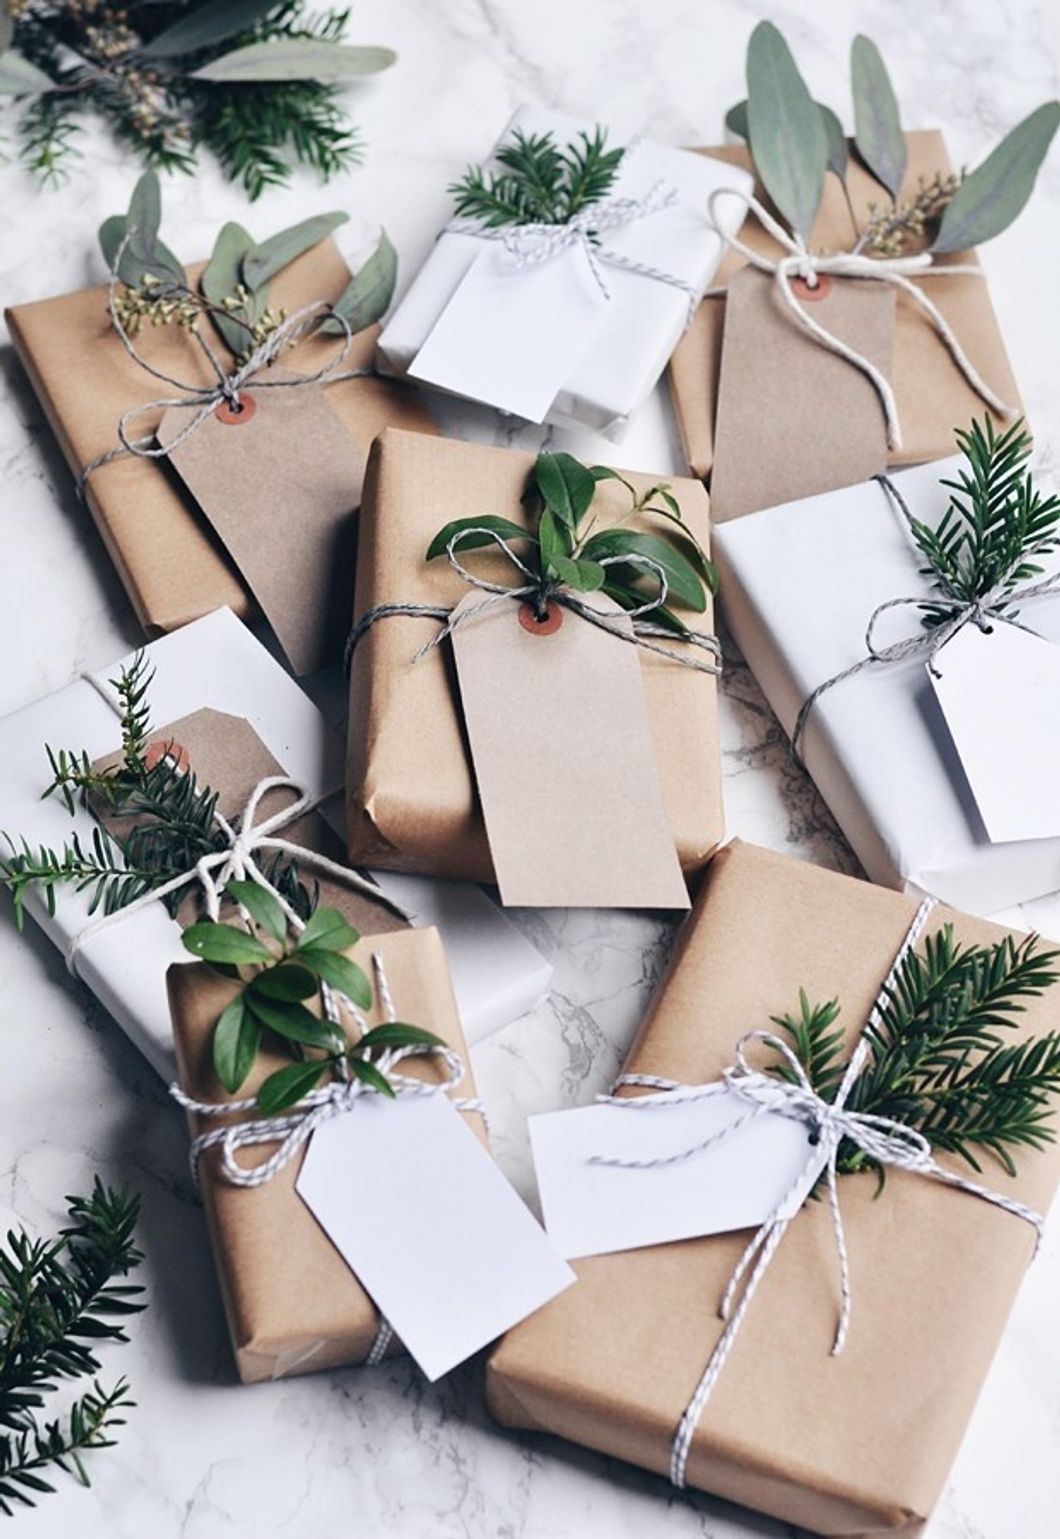 5 Gifts To Gift Yourself This Holiday Season